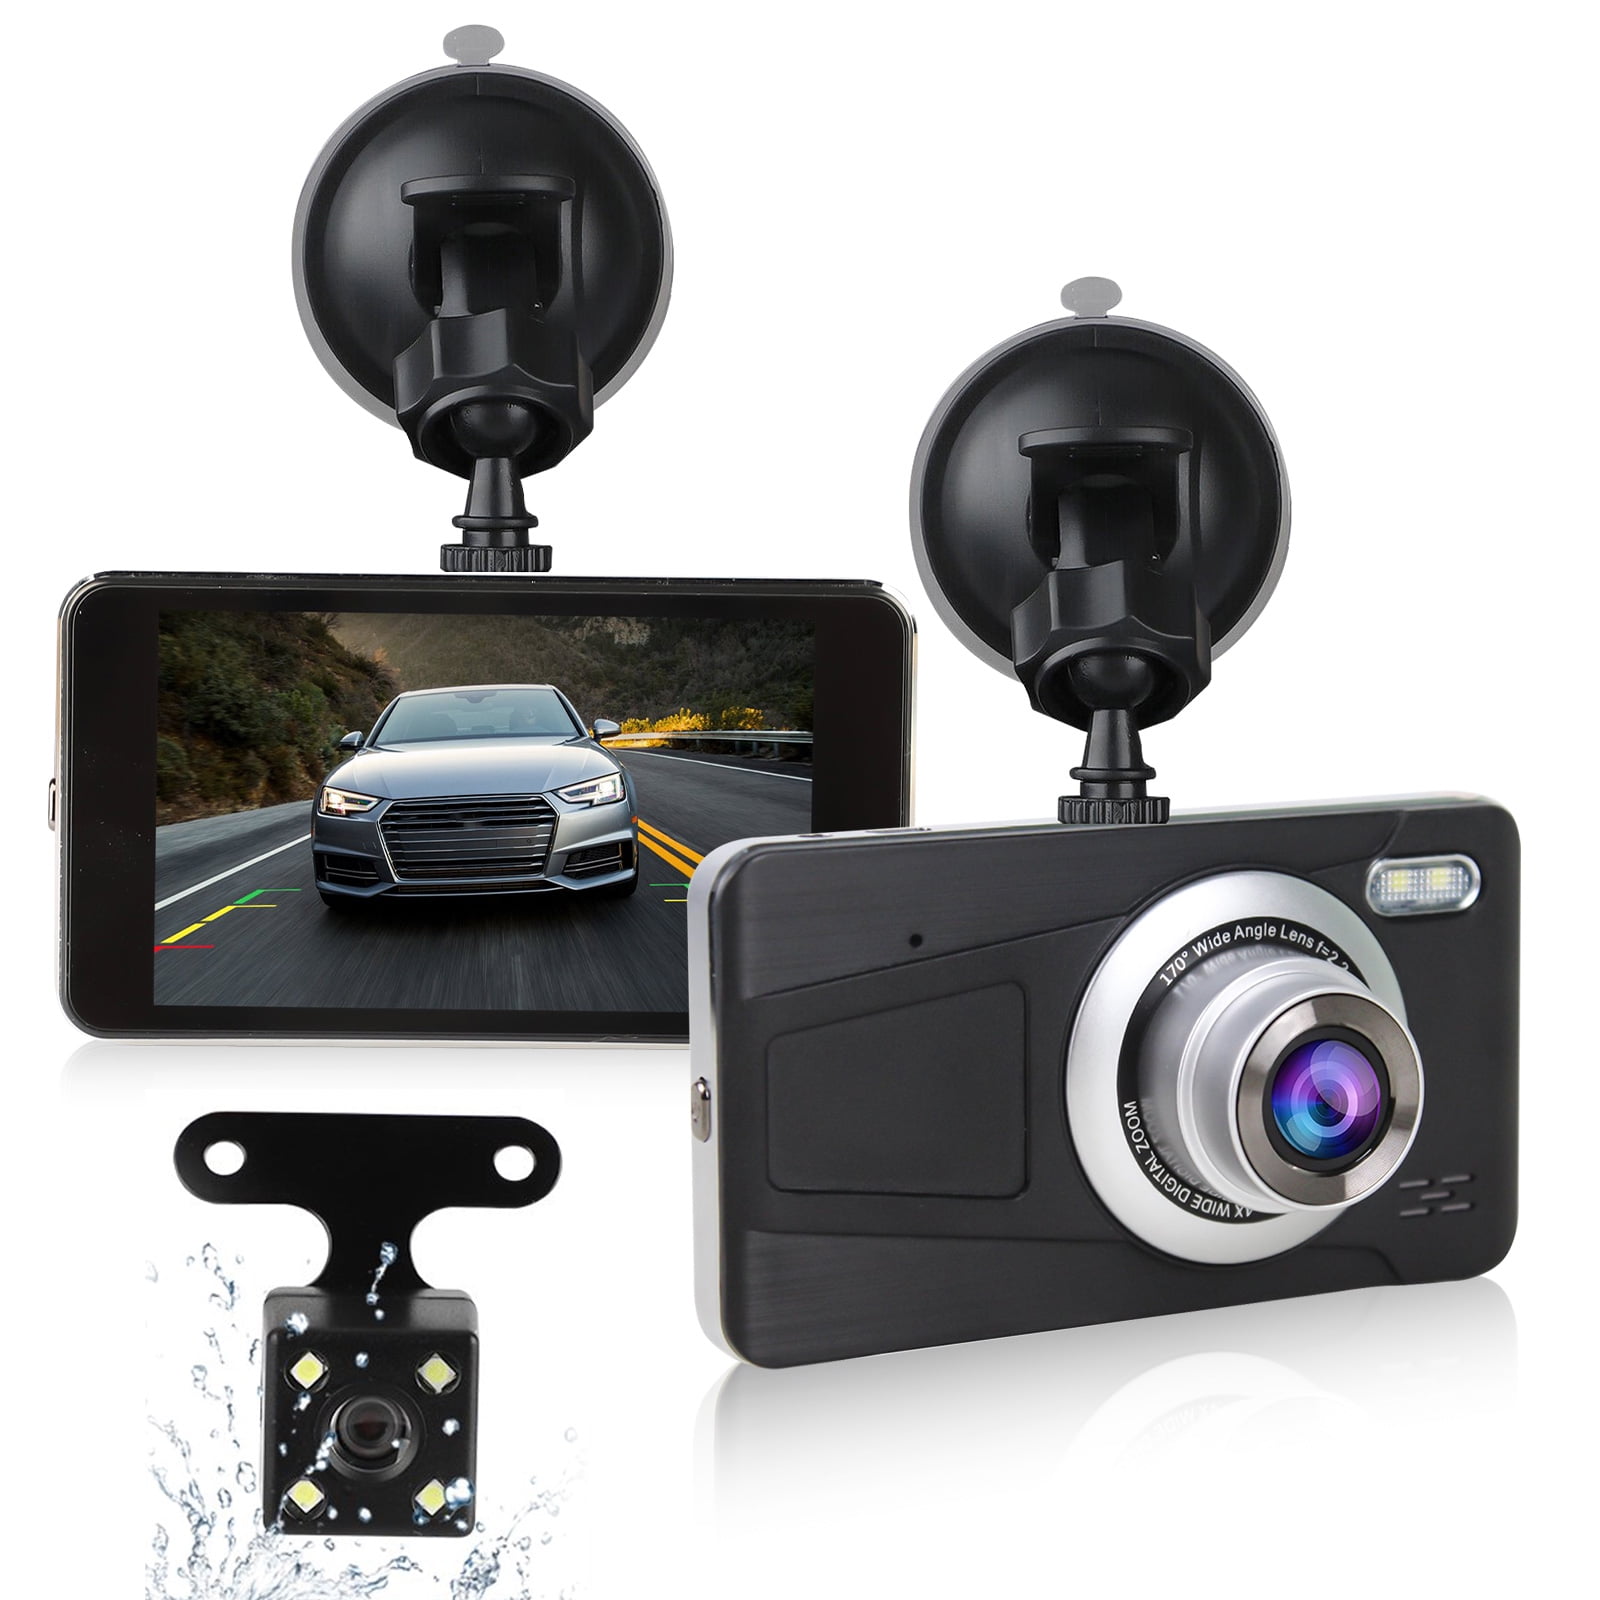 Watt gijzelaar Wonen Car Dual Dash Cam, EEEkit 1080P Front and 720P Rear Dual Lens Dash Camera  with Night Vision, 170° Wide Angle, 4inch IPS Display, Car DVR Dashboard  Driving Recorder with G-Sensor/ Motion Detection -